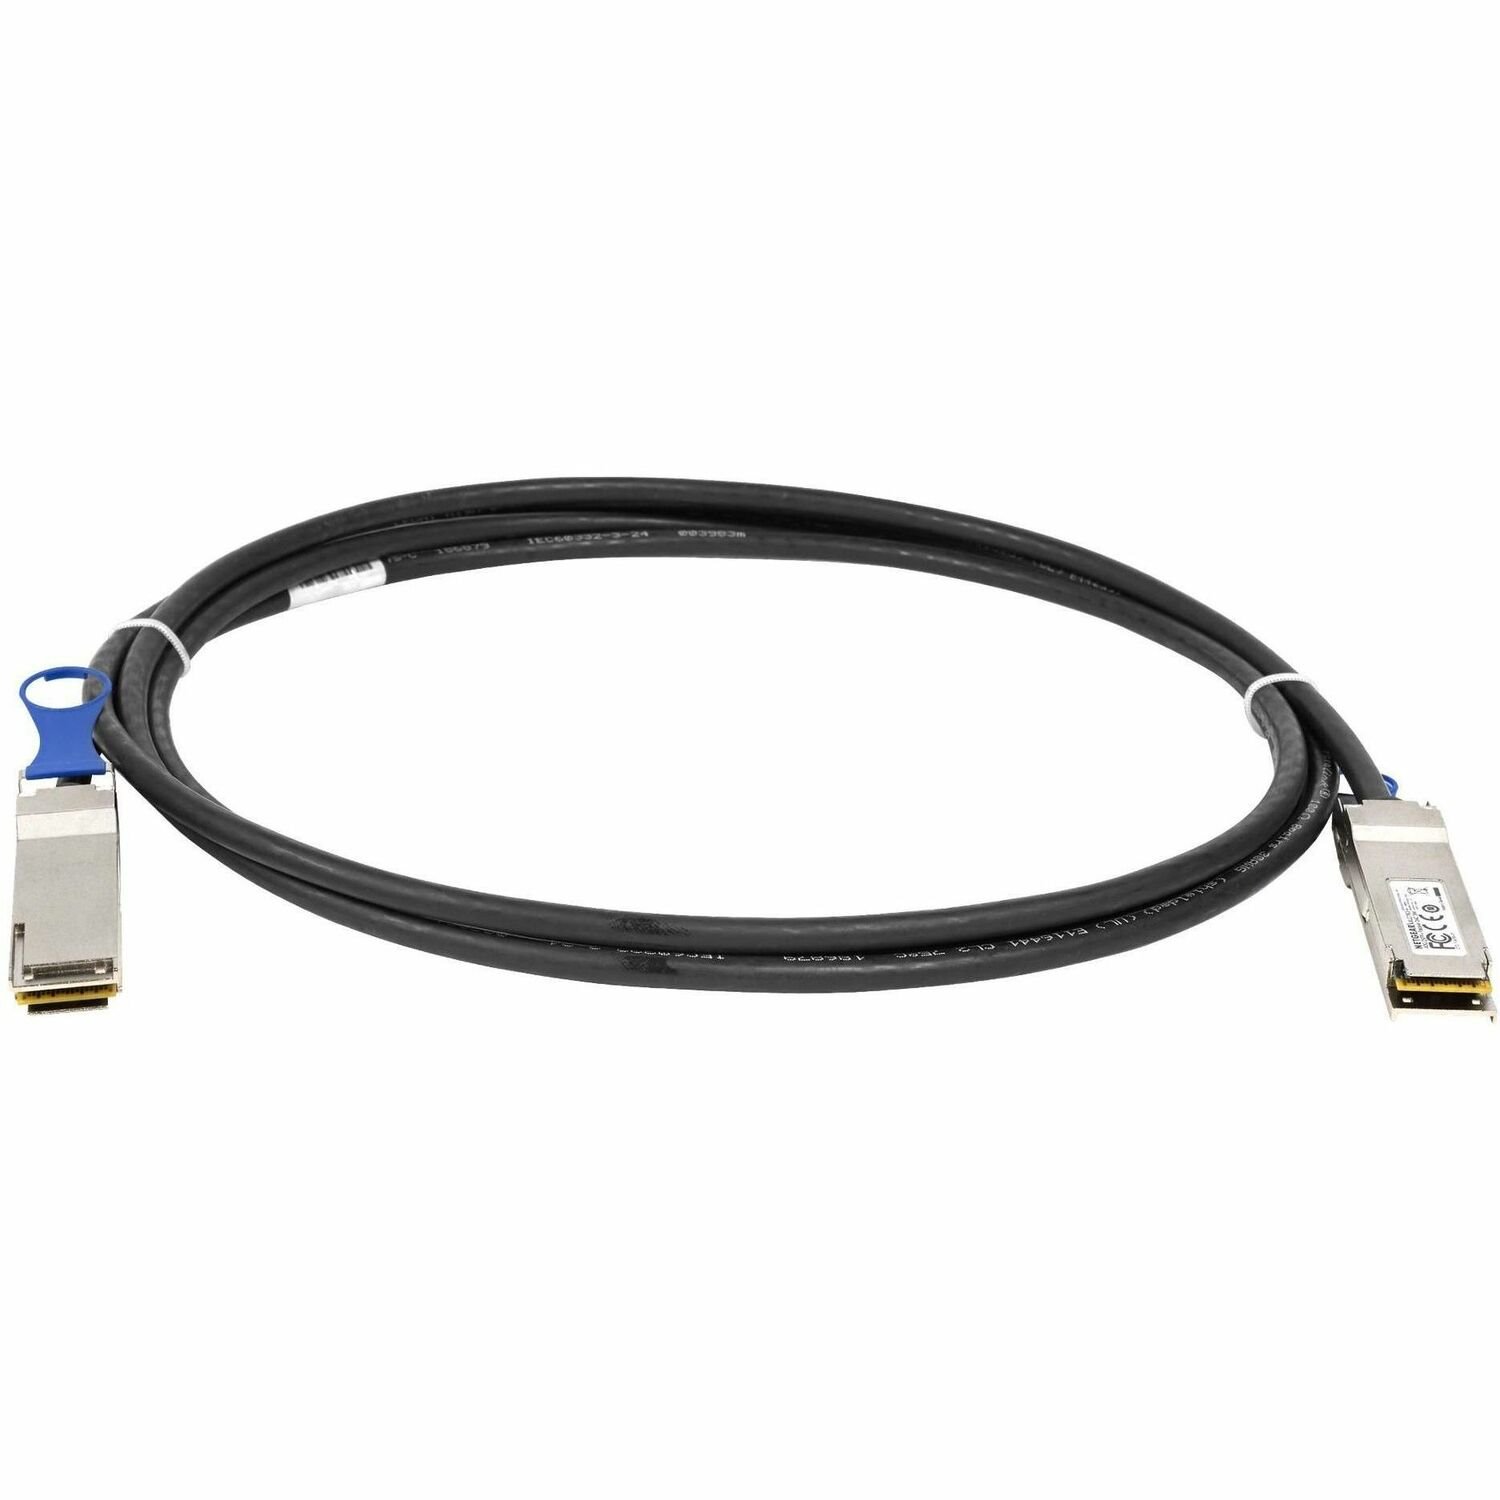 Netgear AXLC763-10000S 3 m QSFP+ Network Cable for Network Device